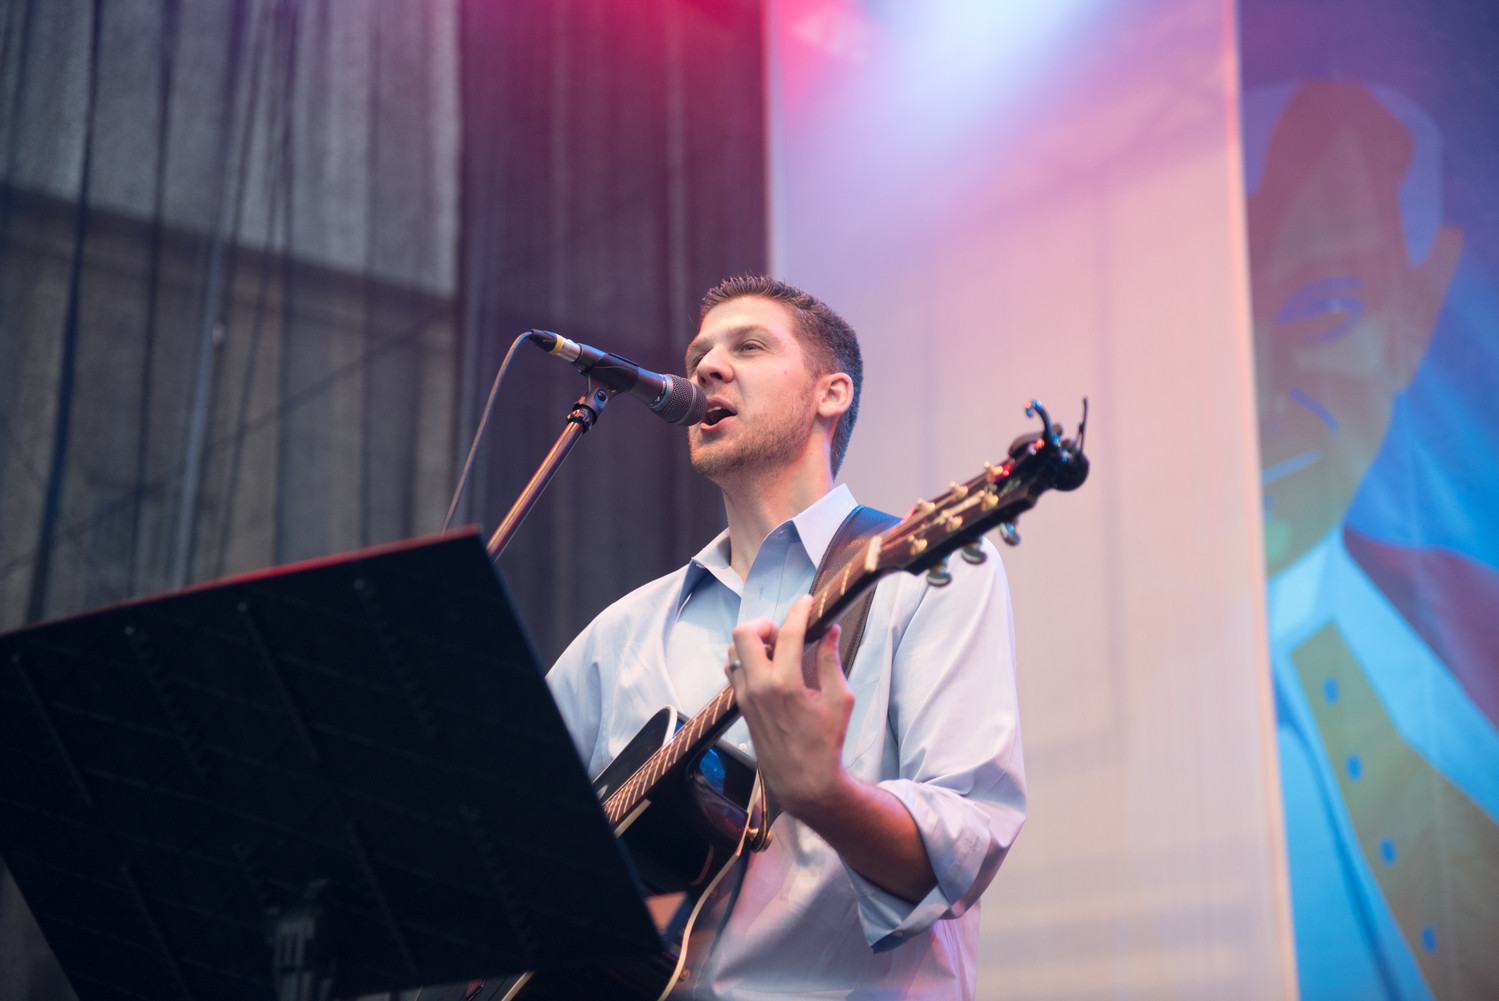 Ryan Tremblay of Middletown, performs at World Youth Day in Poland in 2016. Tremblay will perform at World Youth Day 2019 — which will be held Jan. 22-27 in Panama.